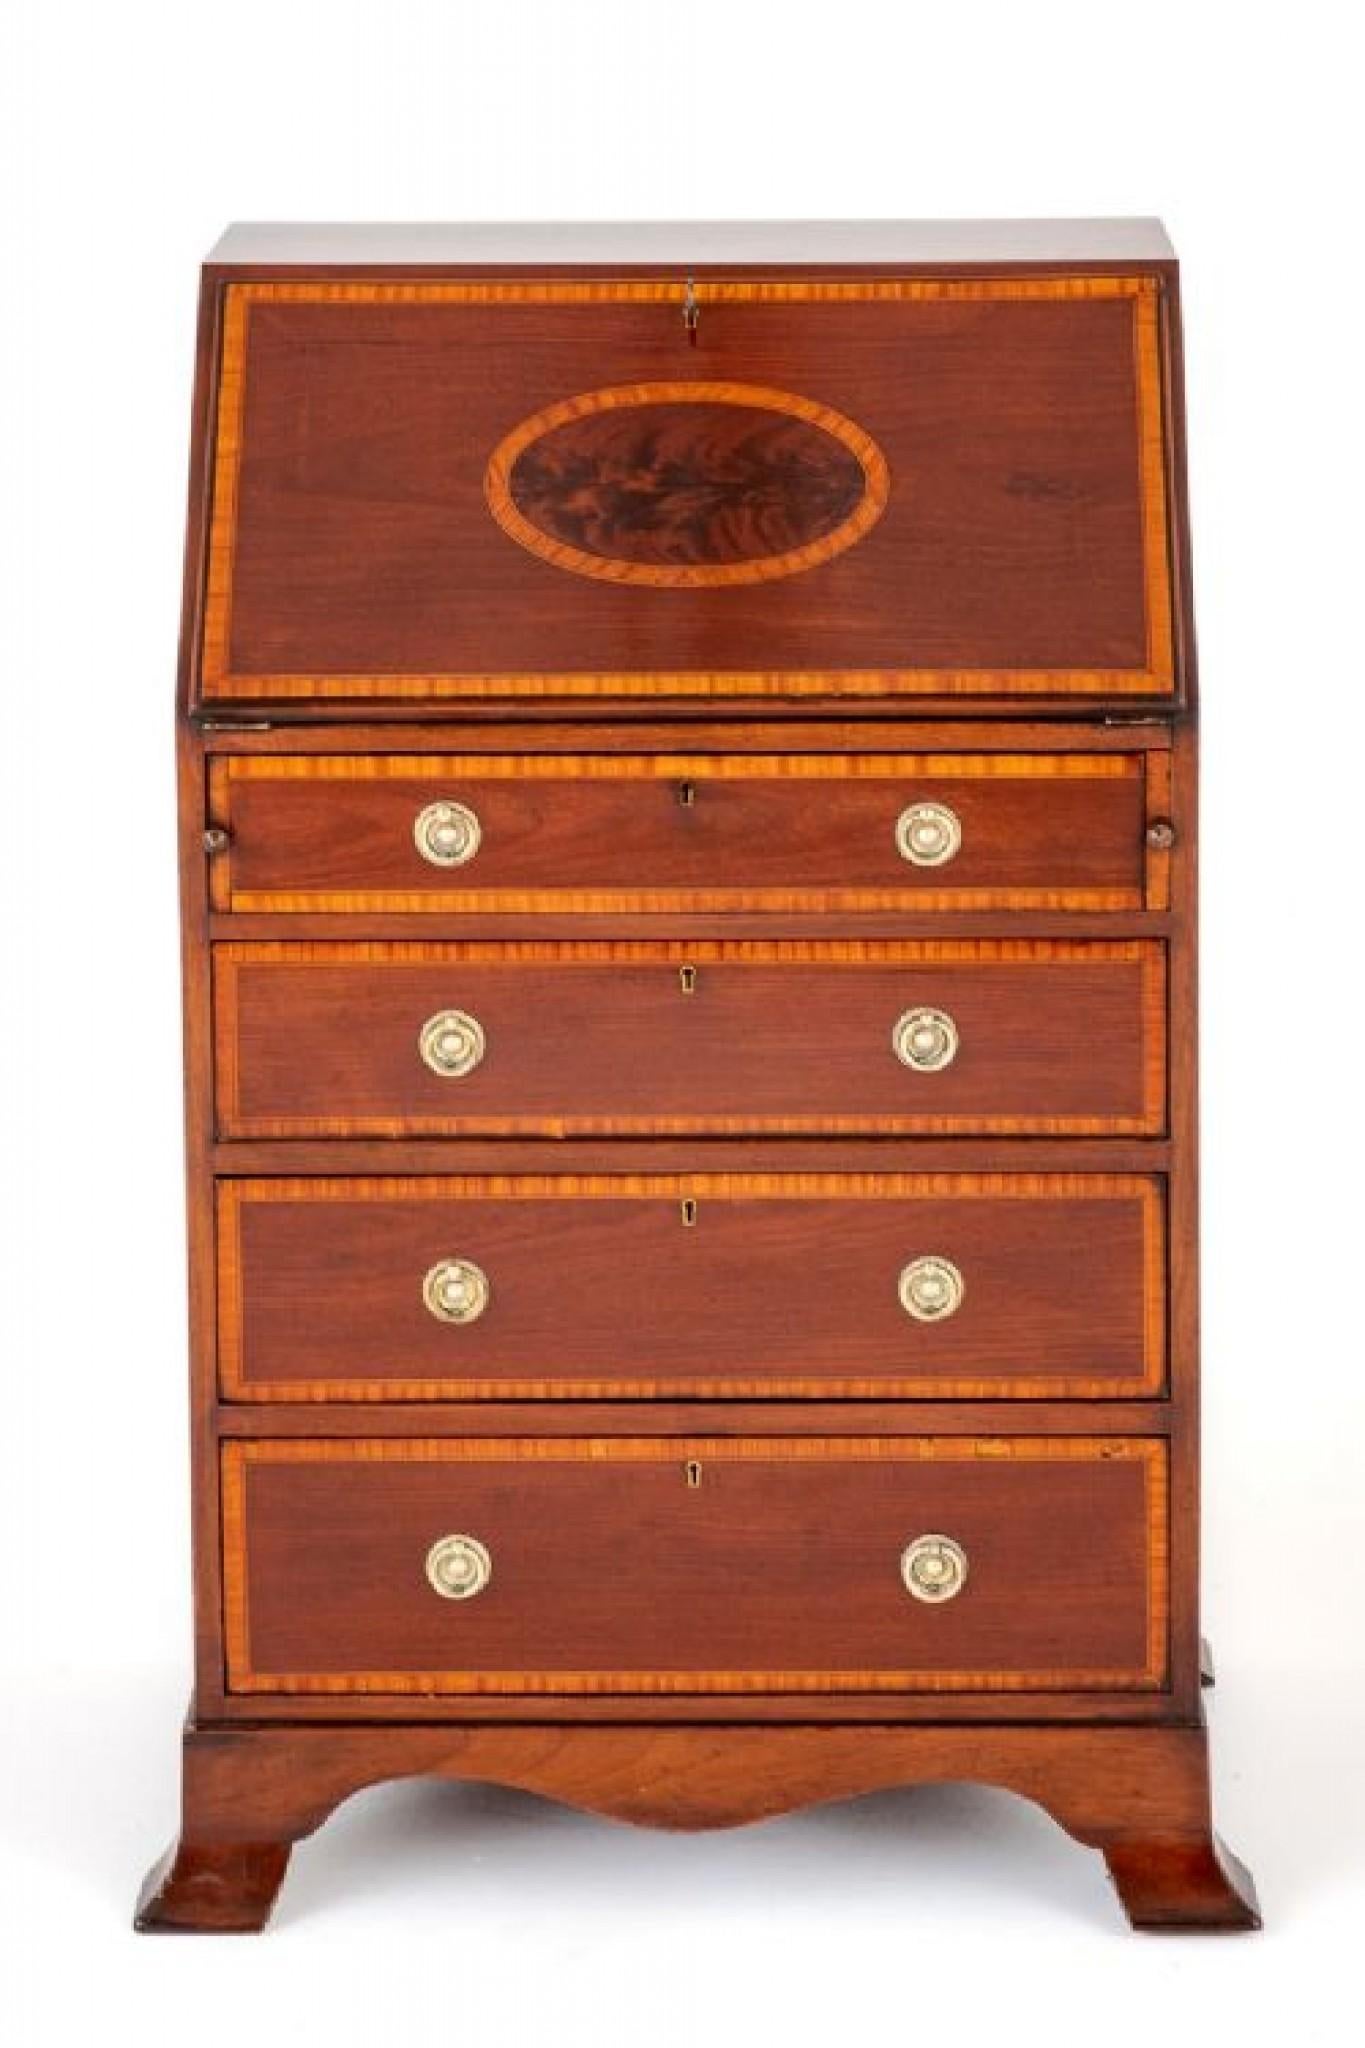 Sheraton Revival Mahogany Ladies Bureau.
This Bureau Stands Upon Splay Feet with a Shaped Frieze.
Circa 1890
Having 4 Graduated Oak Lined Drawers.
The Drawers Retain their Original Brass Ring Pull Handles.
The Drawers Feature Satinwood